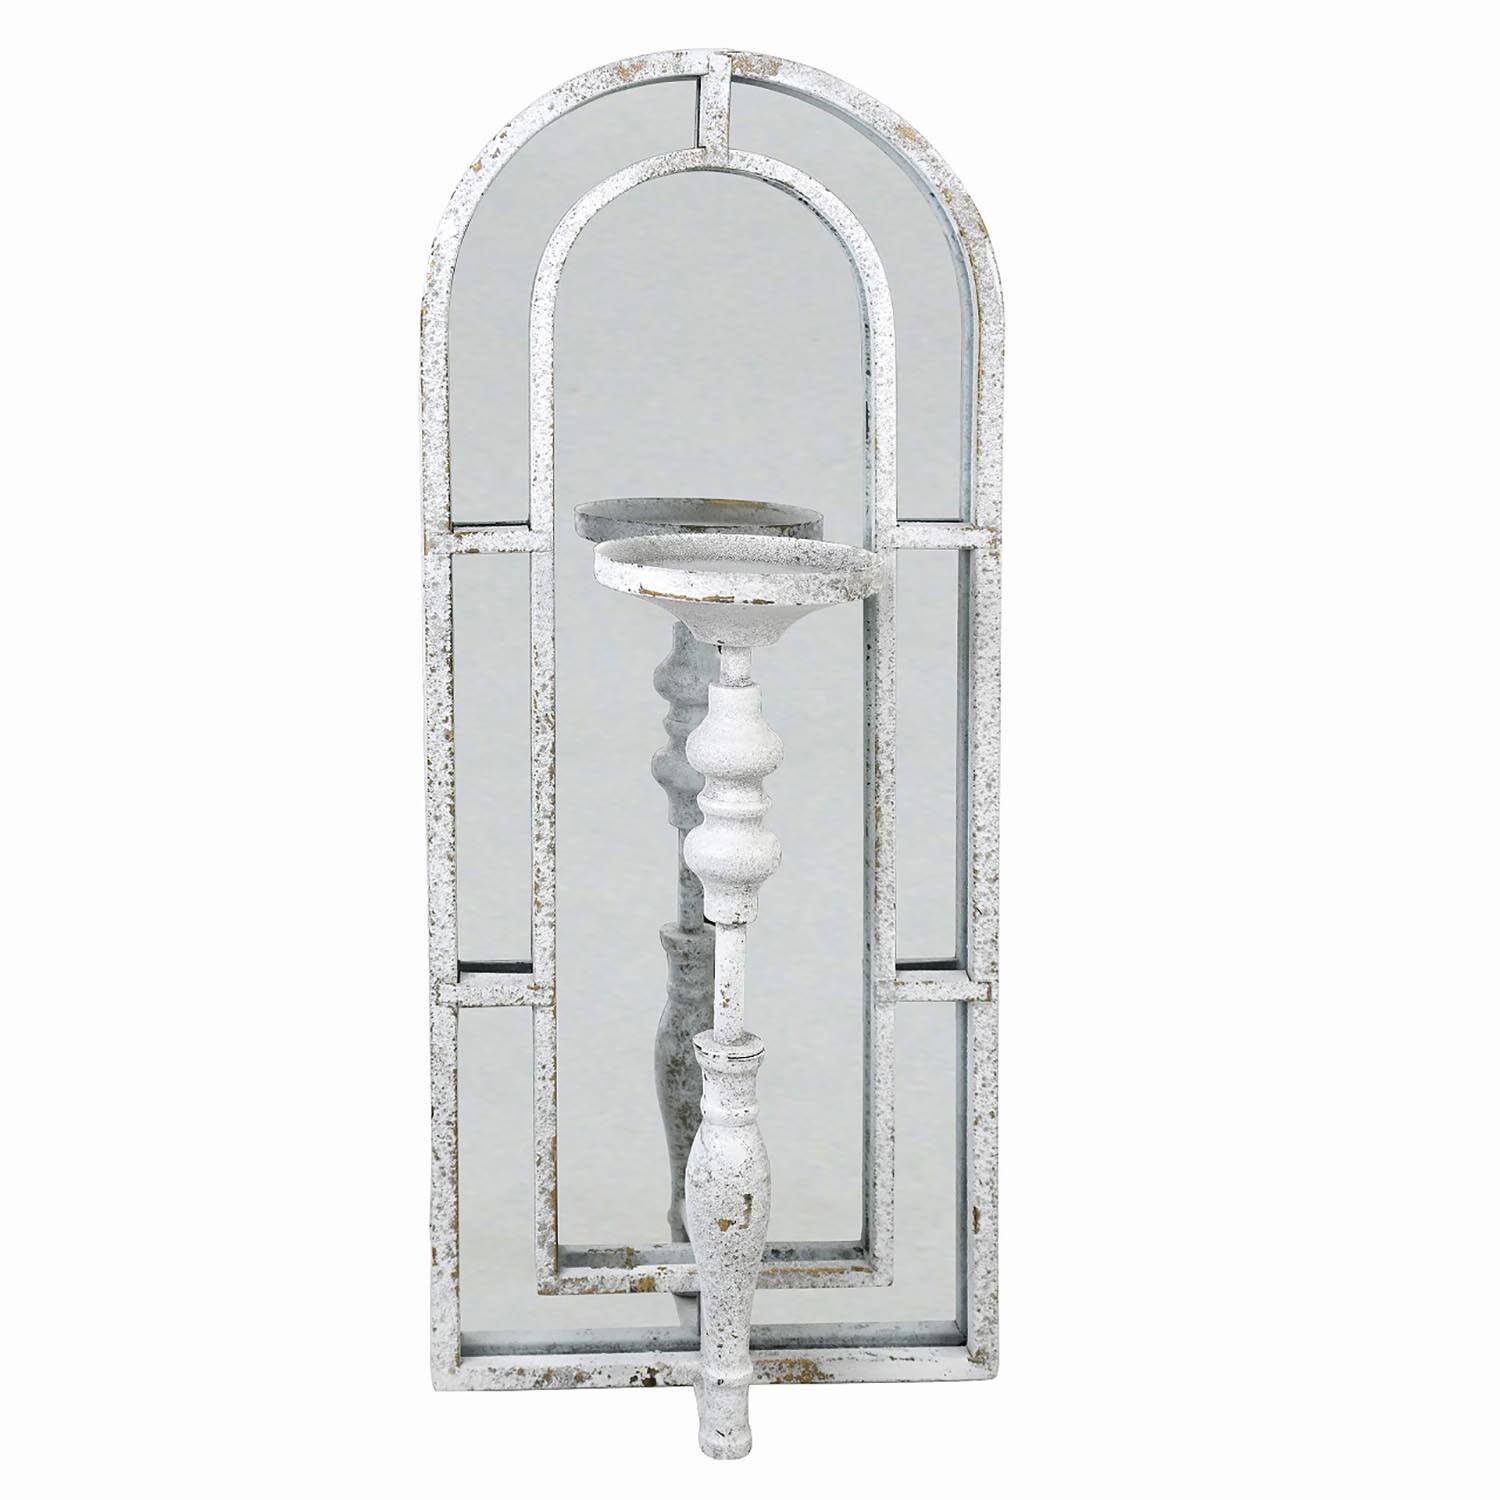 Rustic Arched Mirrored Candle Holder - Grey Image 1